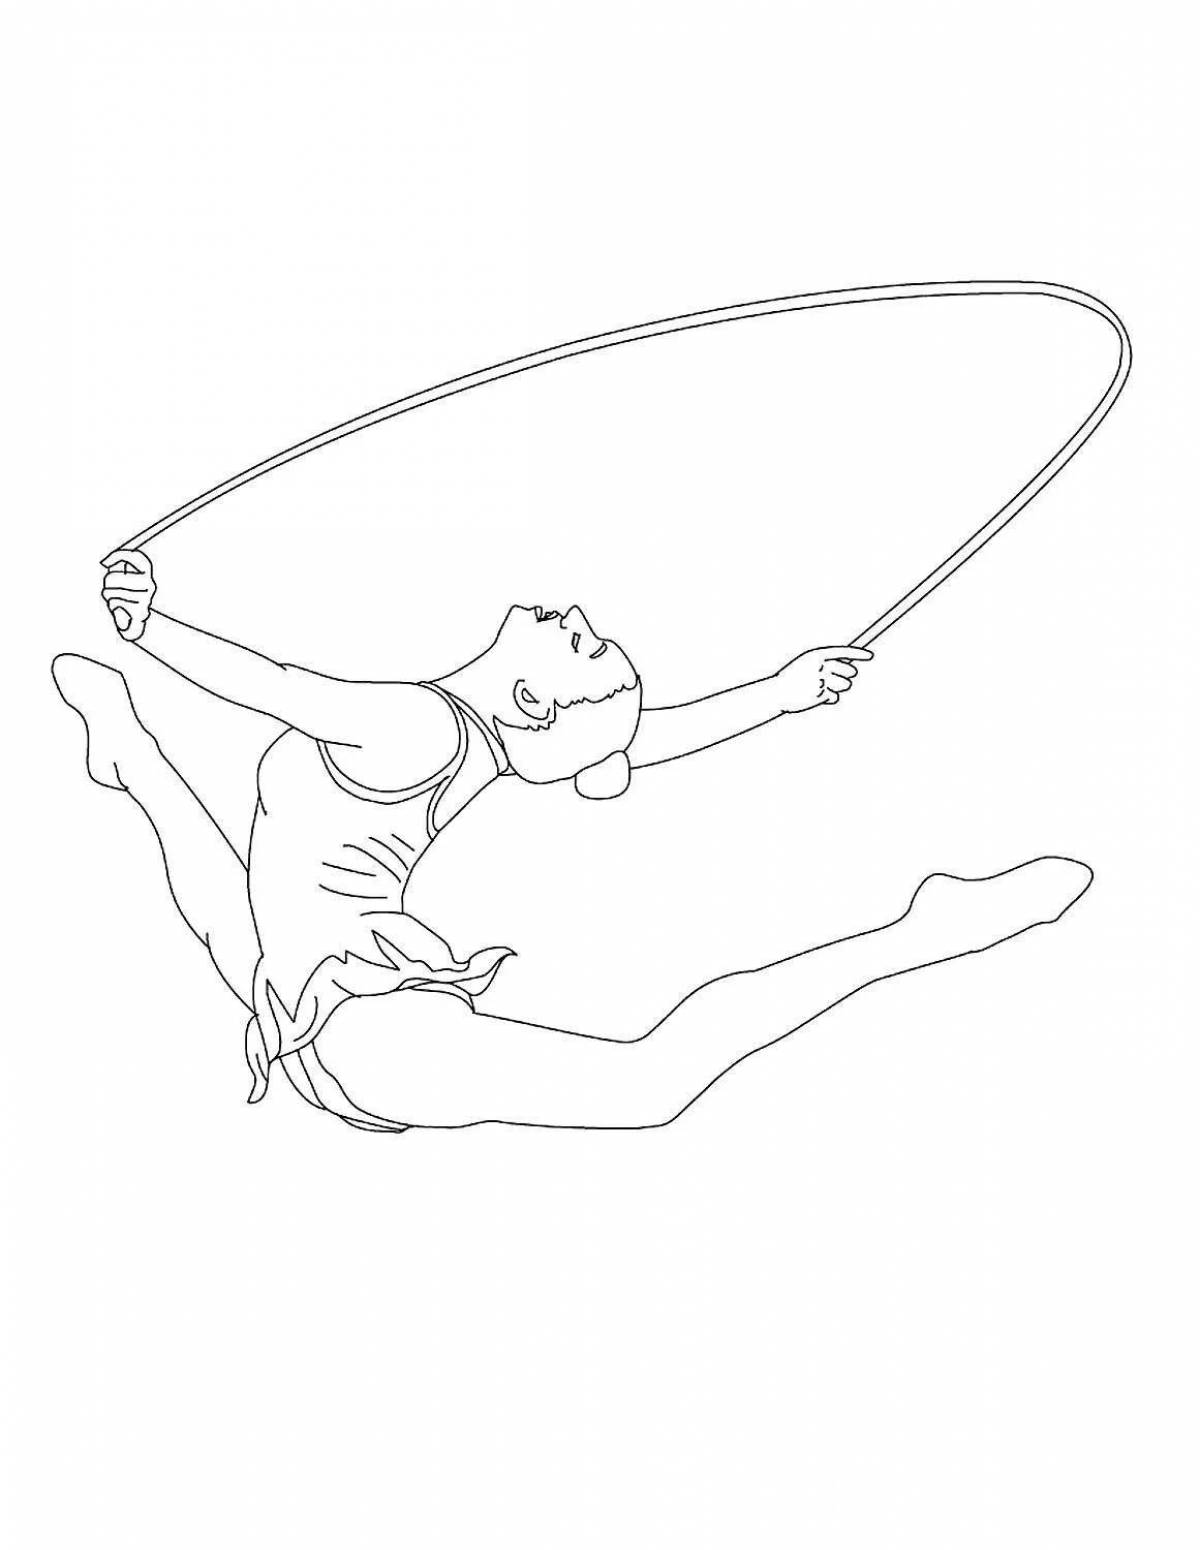 Coloring book gorgeous barbie gymnast